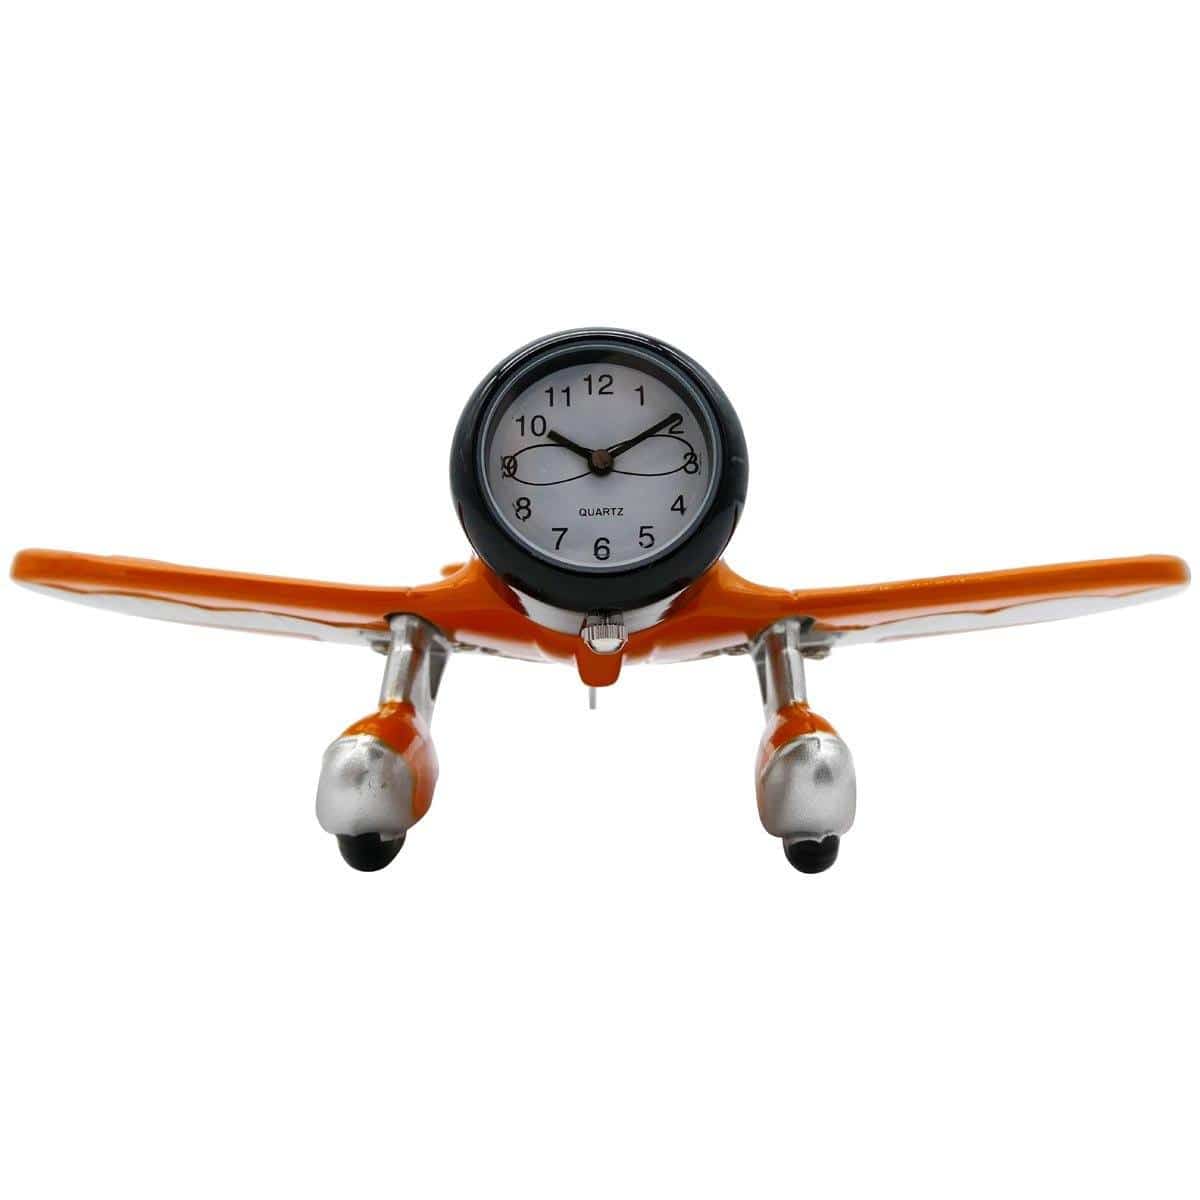 Pilot Toys Orange and Silver Gee Bee Desk Clock